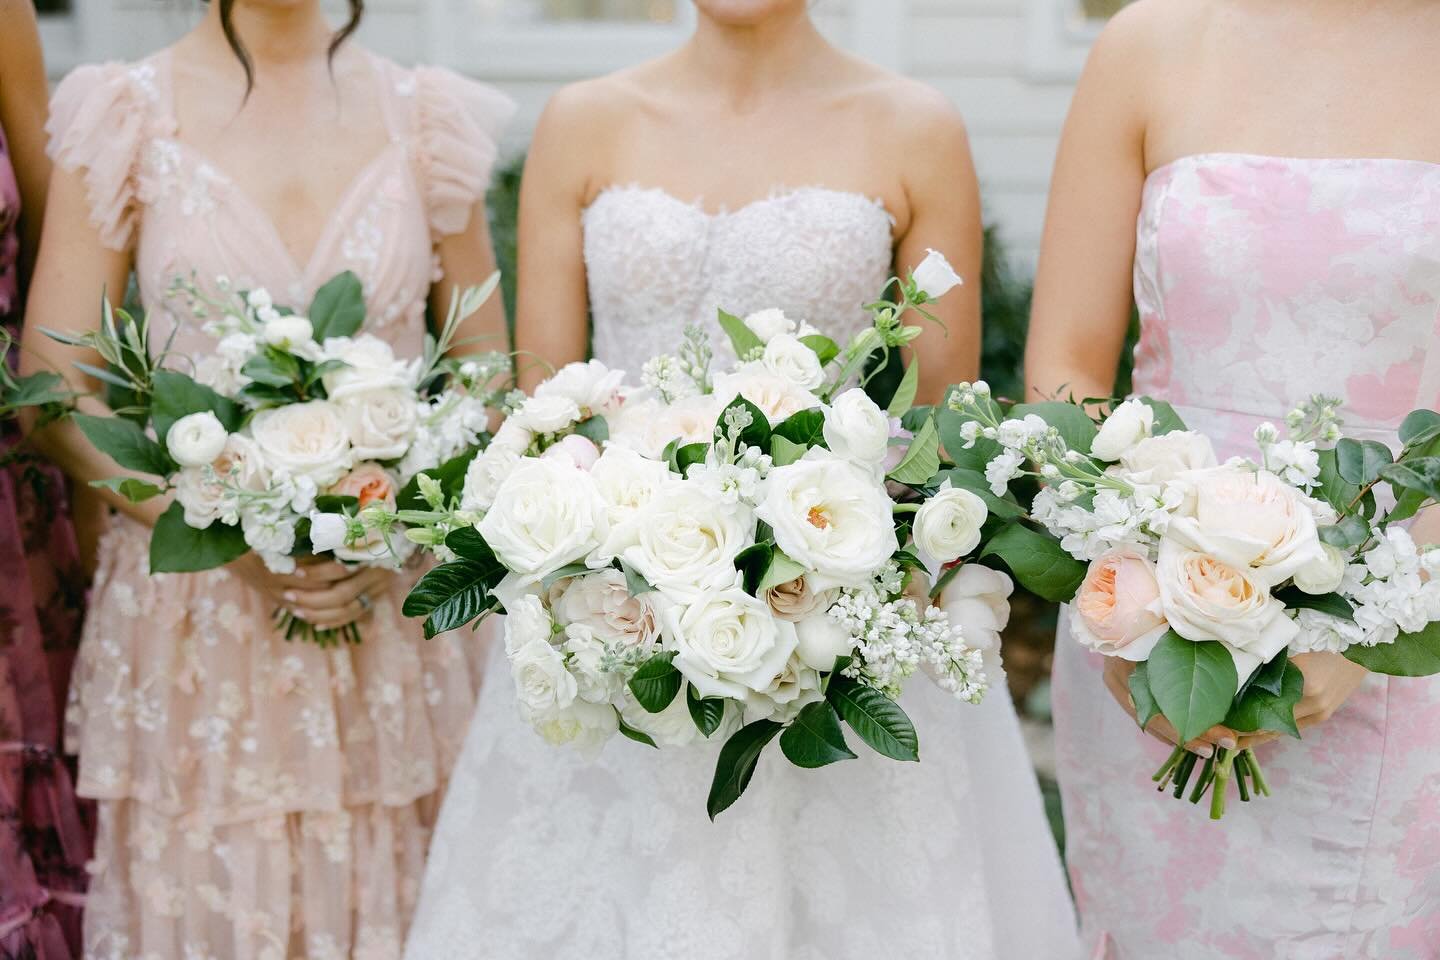 The thing is, if we could caption every post with a gif, we would. And this one would be swooning 😍

photo: @langthomas_studios 

#weddingflowers #bouquets #bride #bridalbouquet #weddingflorist #floraldesign #floraldesigner #florist #weddingplanning